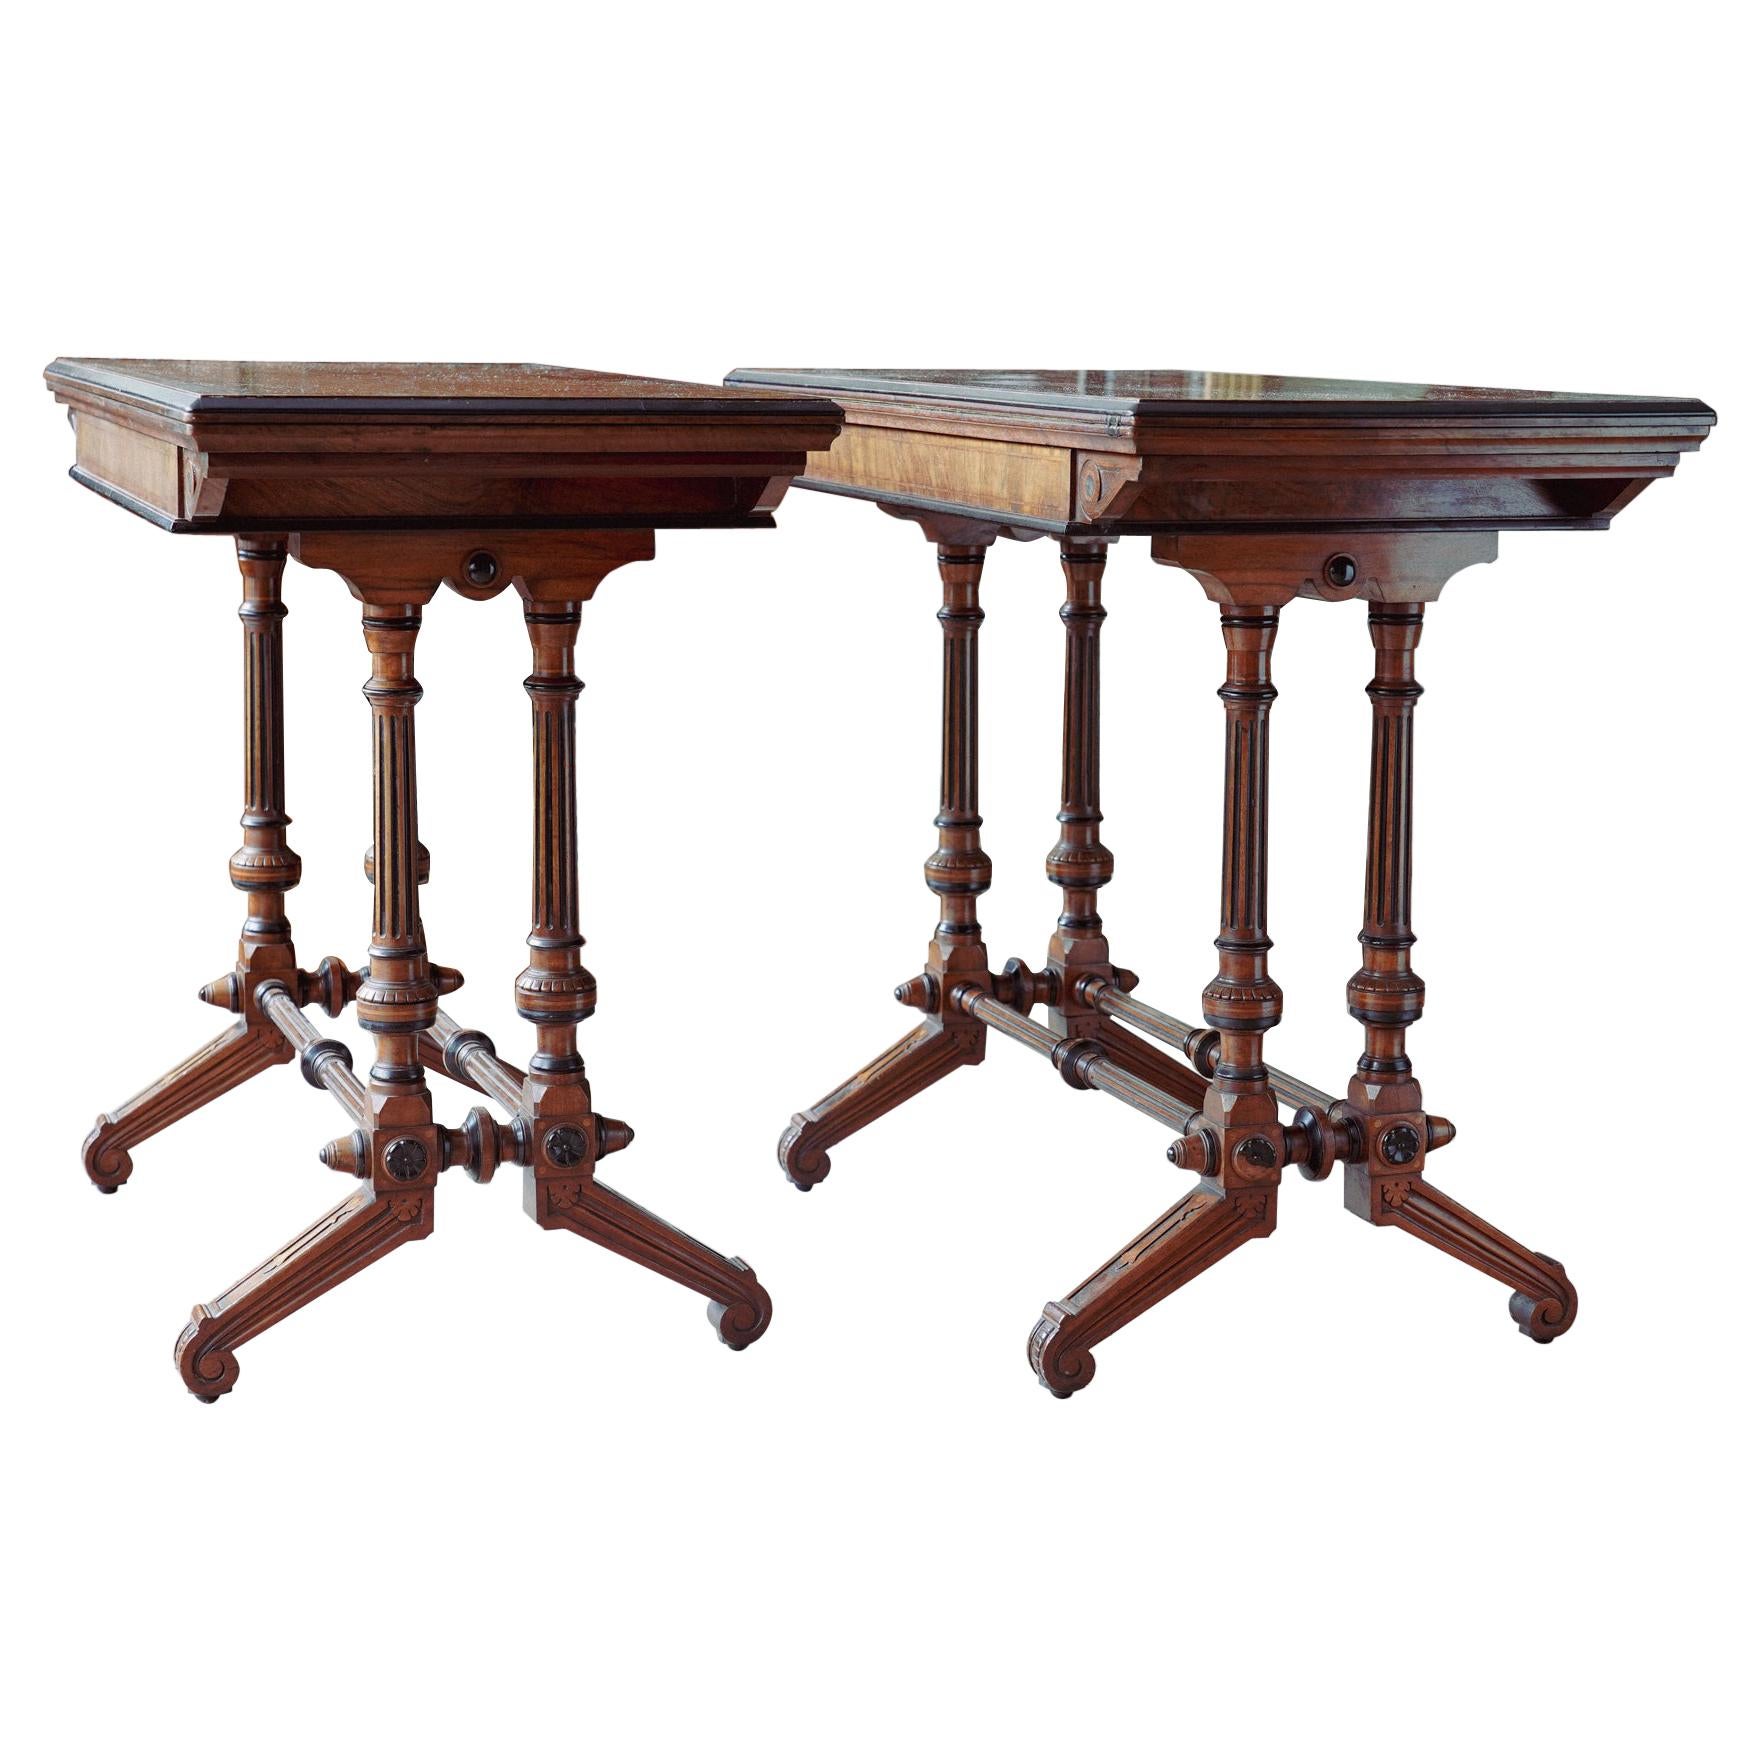 Pair of Walnut Gaming Tables by Lamb of Manchester